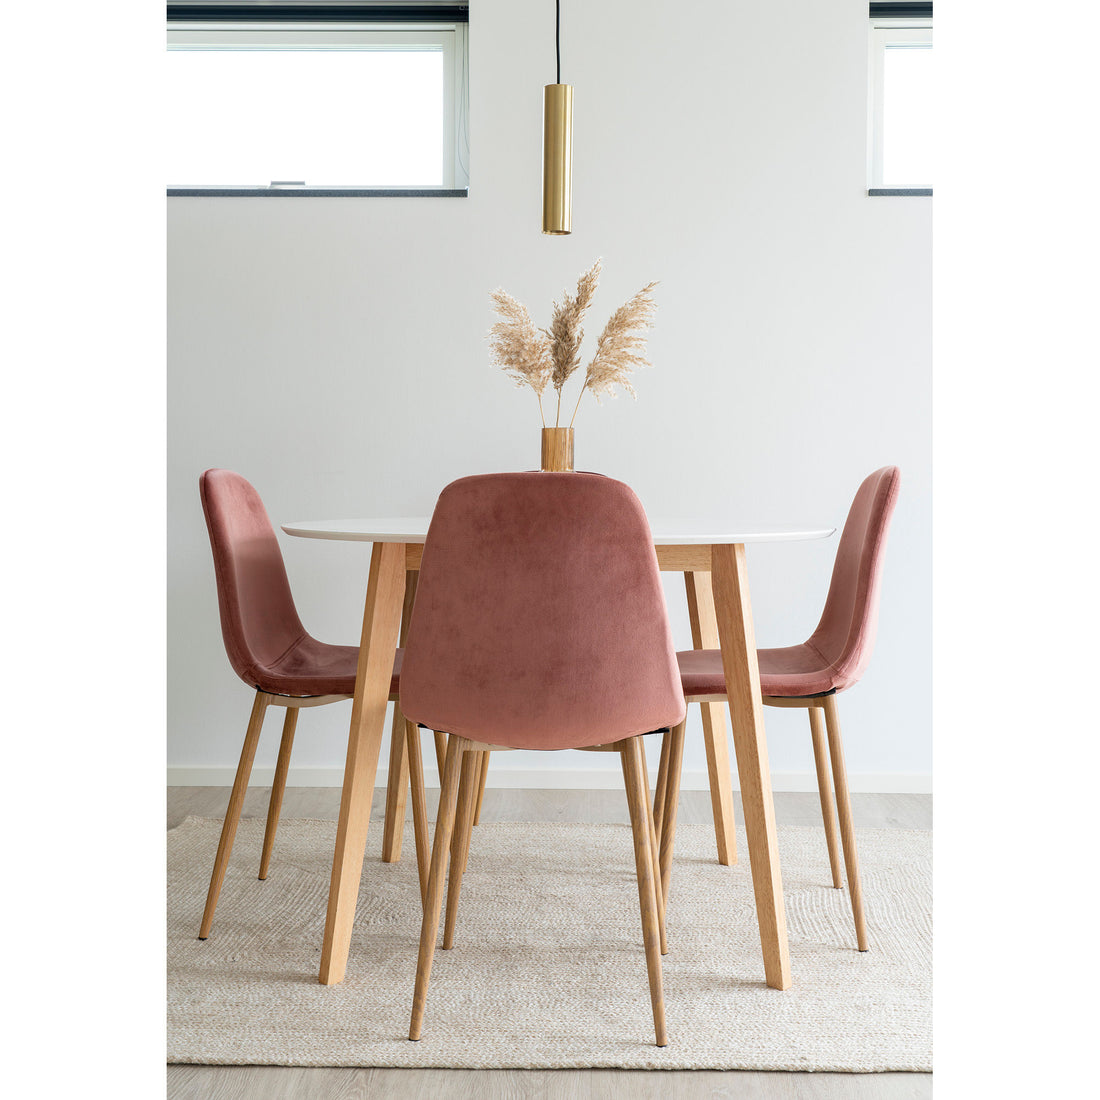 House Nordic - Vojens Dining Table